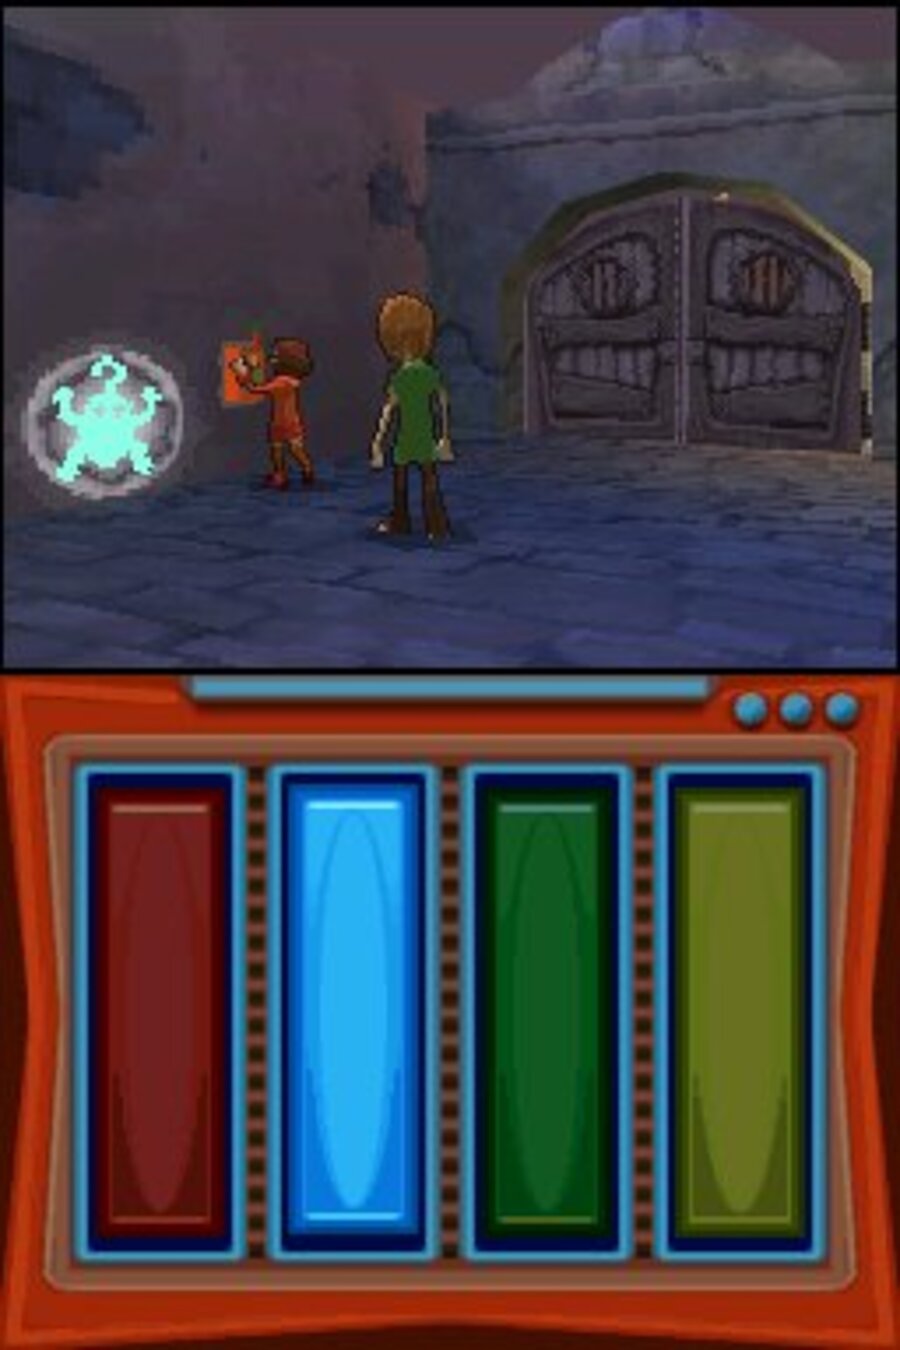 scooby doo and the spooky swamp all ghost locations